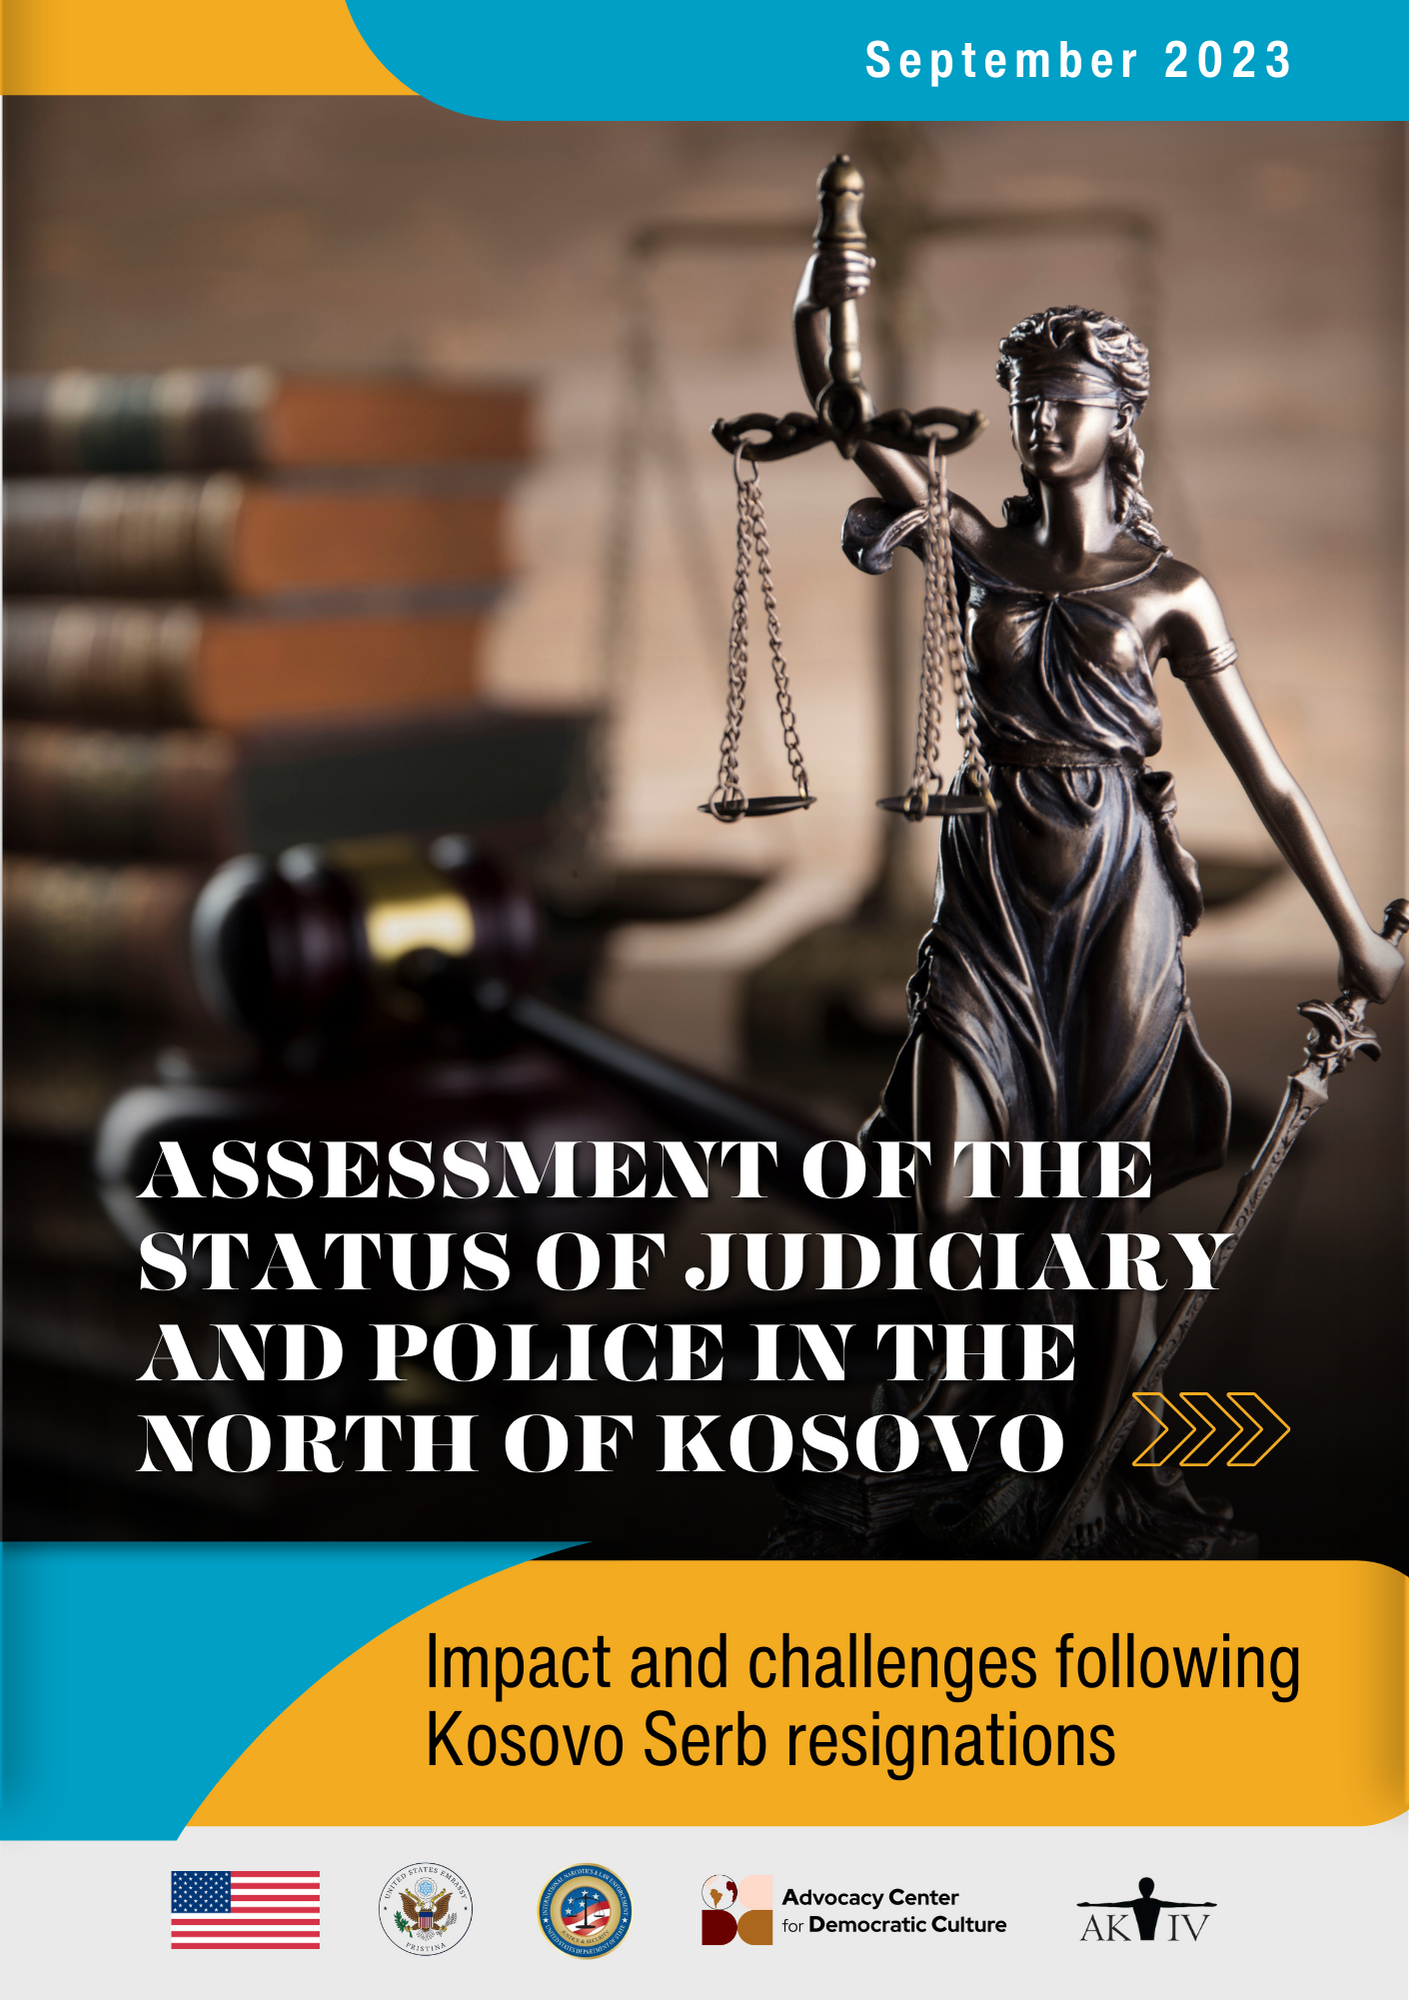 Assessment of the status of Judiciary and police in northern Kosovo - September 2023